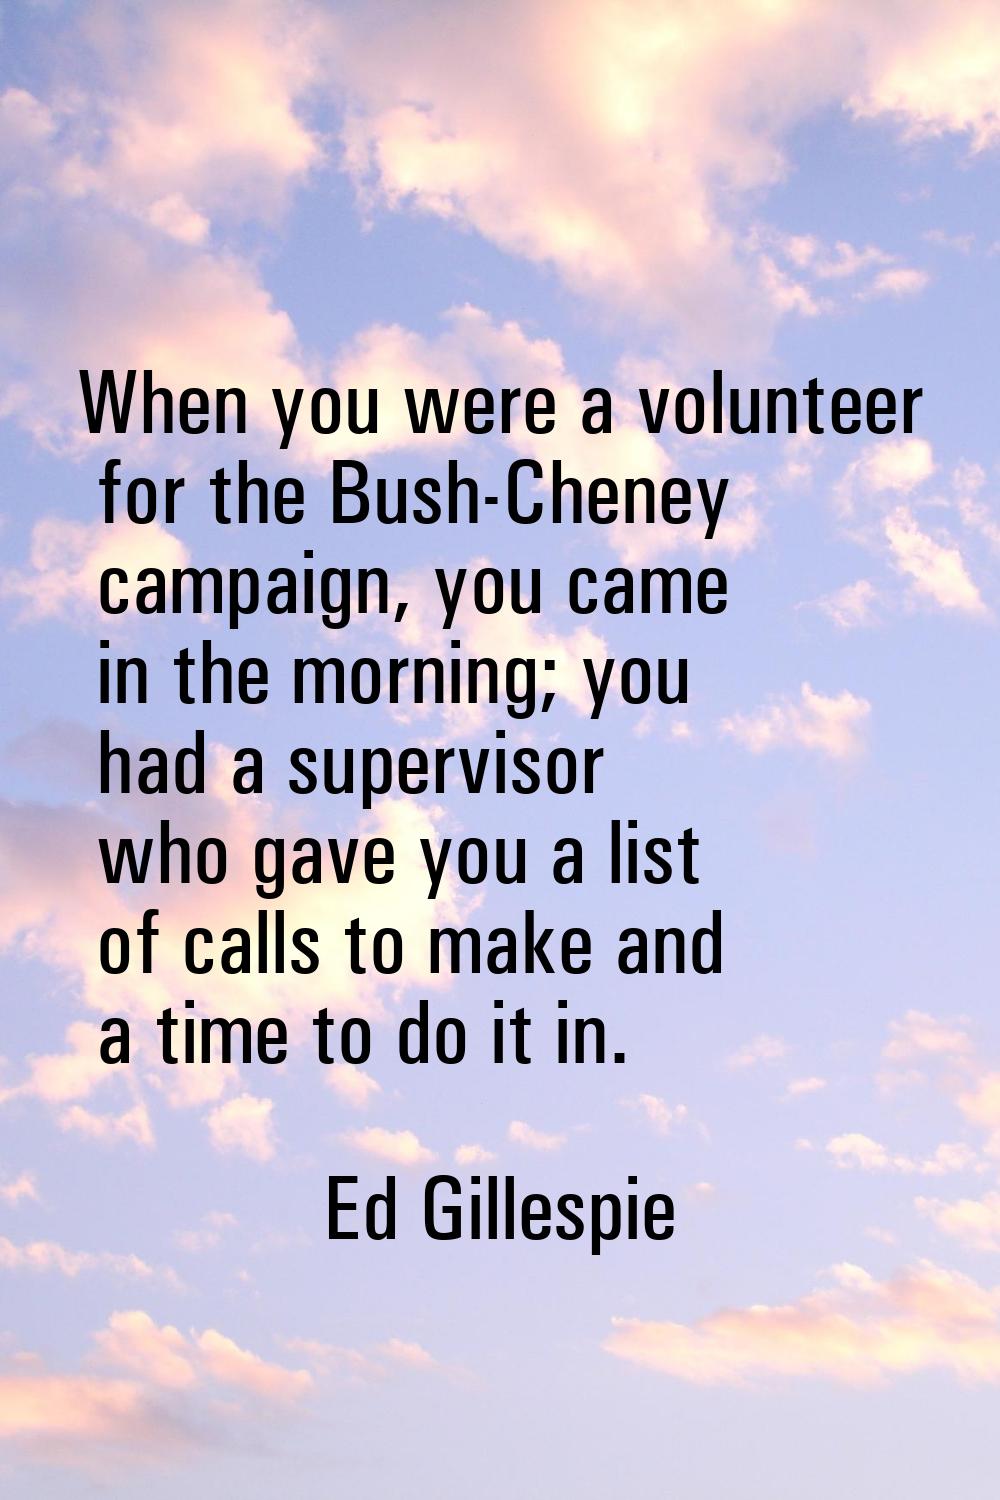 When you were a volunteer for the Bush-Cheney campaign, you came in the morning; you had a supervis